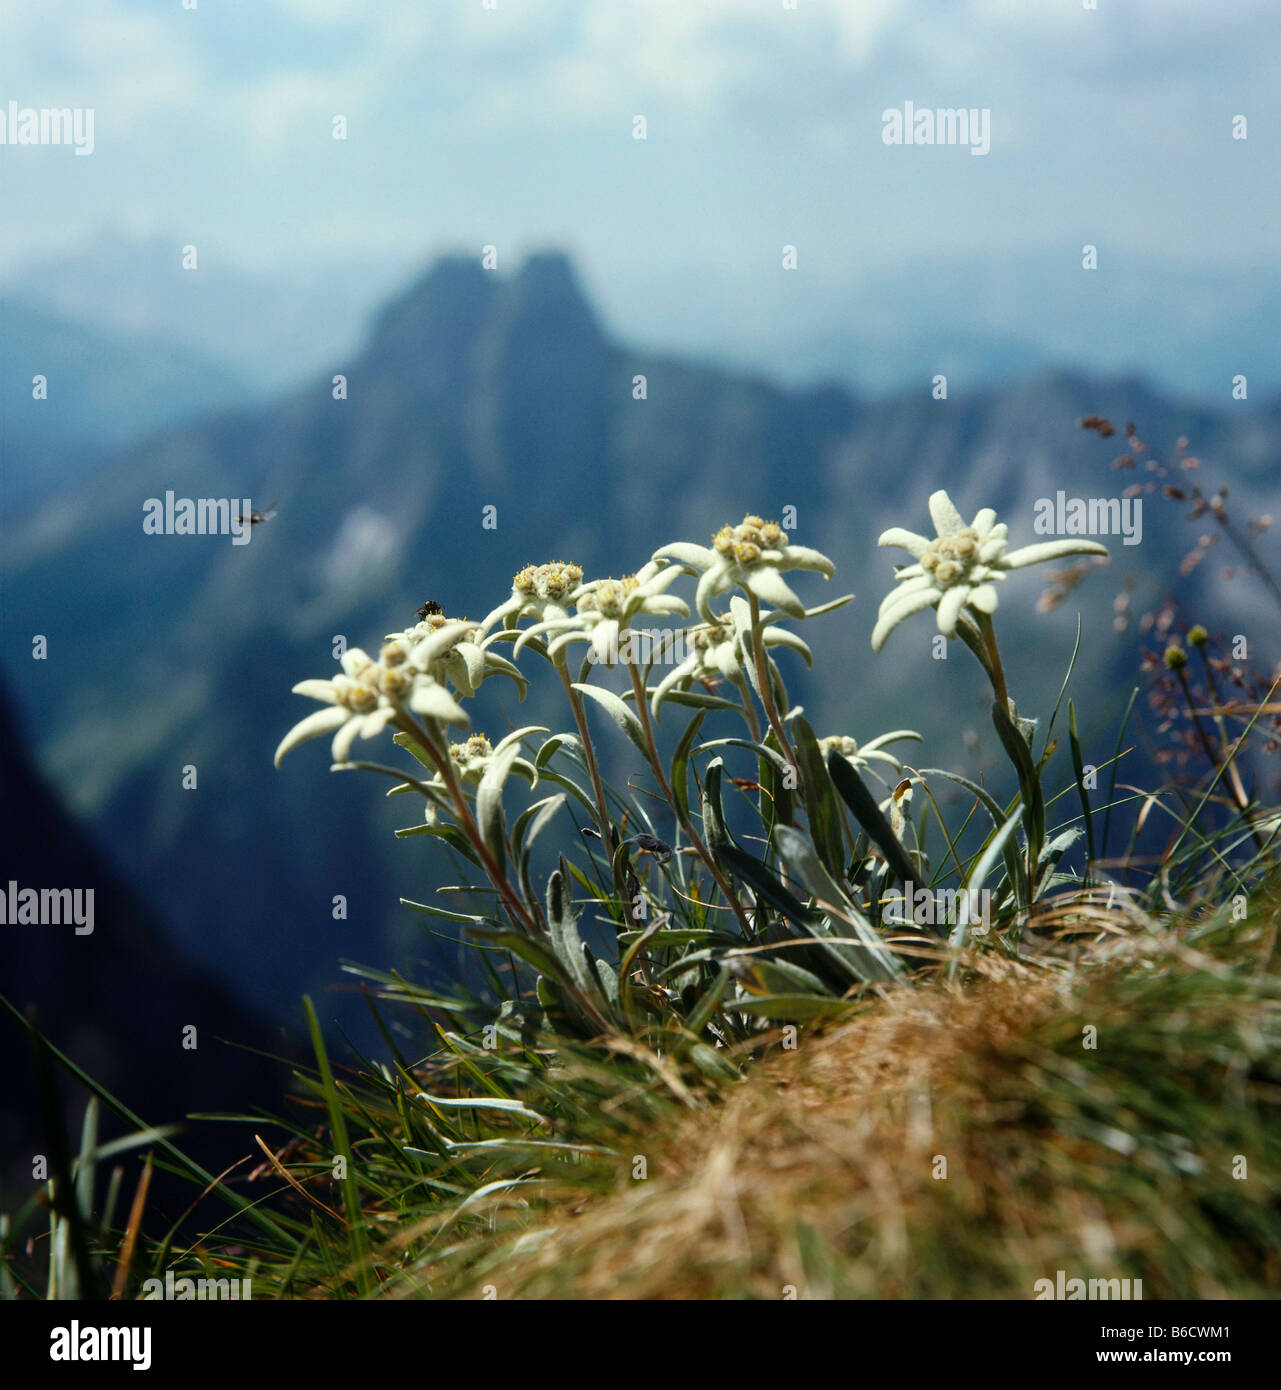 Close-up of flowers blooming on hill, Allgaeu, Bavaria, Germany Stock Photo